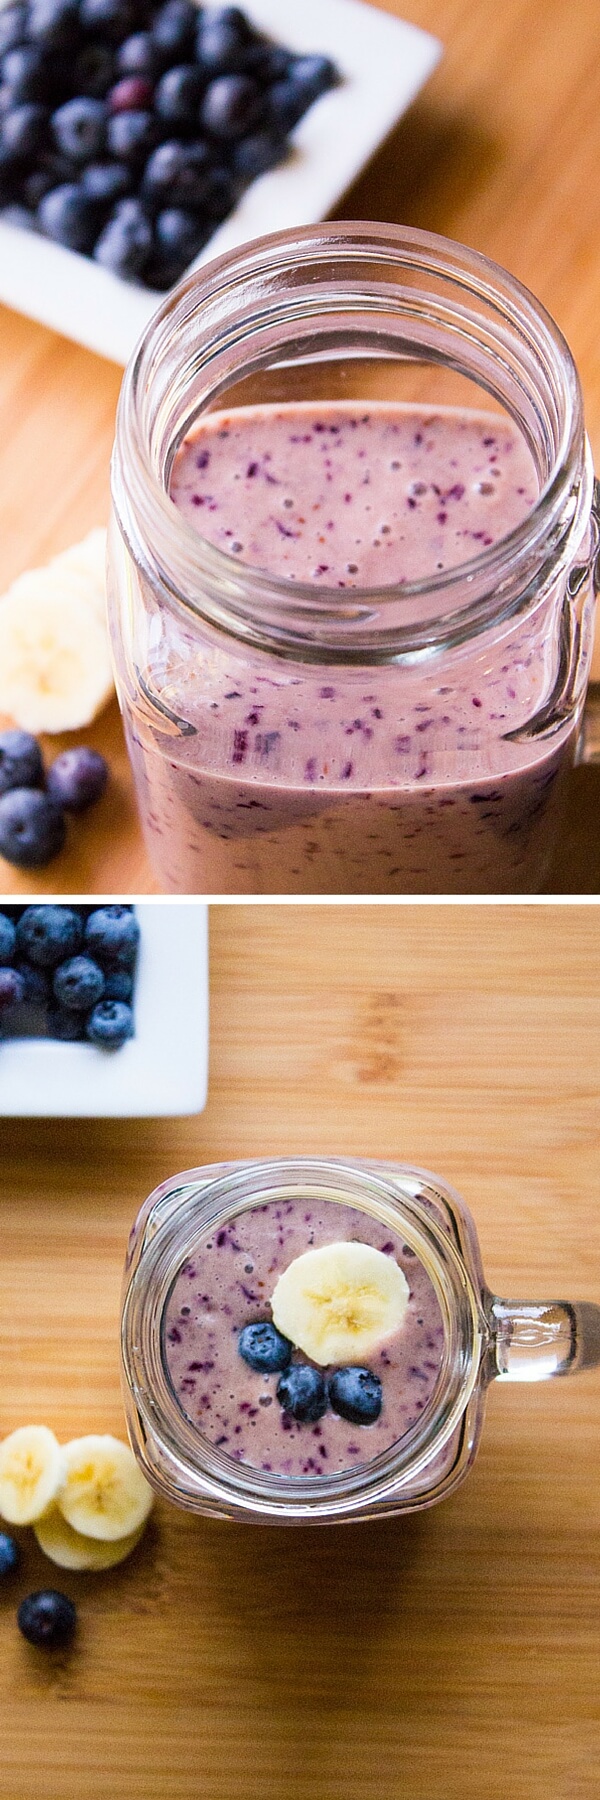 Blueberry Banana Smoothie. Thick & creamy, tastes delicious & totally healthy - have this smoothie for an on-the-go breakfast or healthy snack! www.justsotasty.com